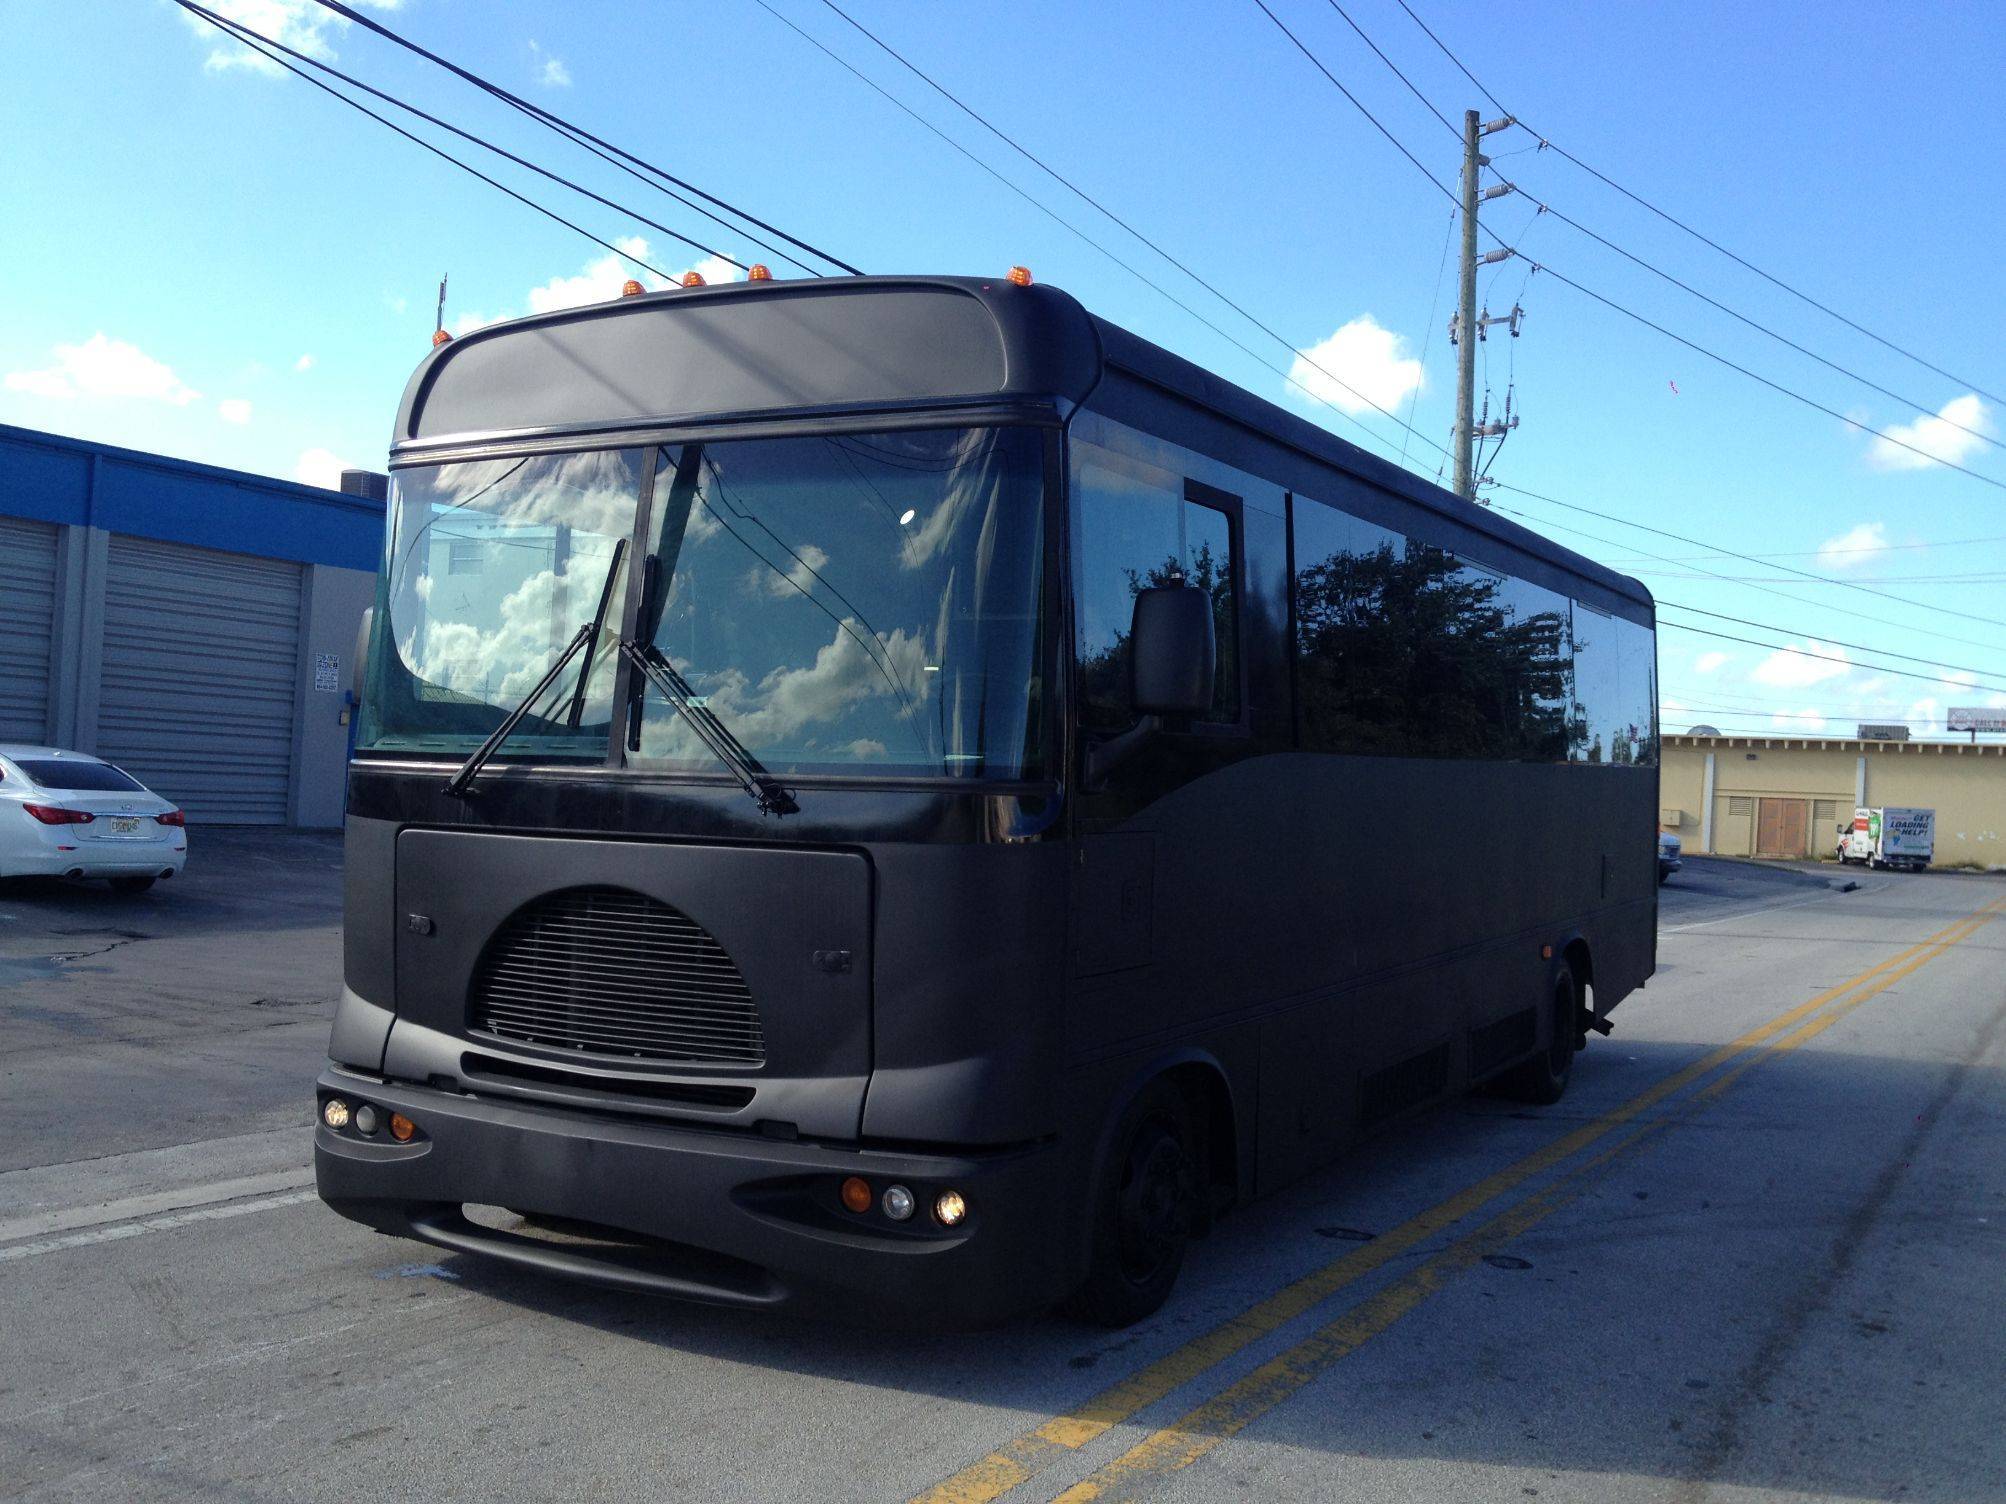 a black bus parked in a parking lot.